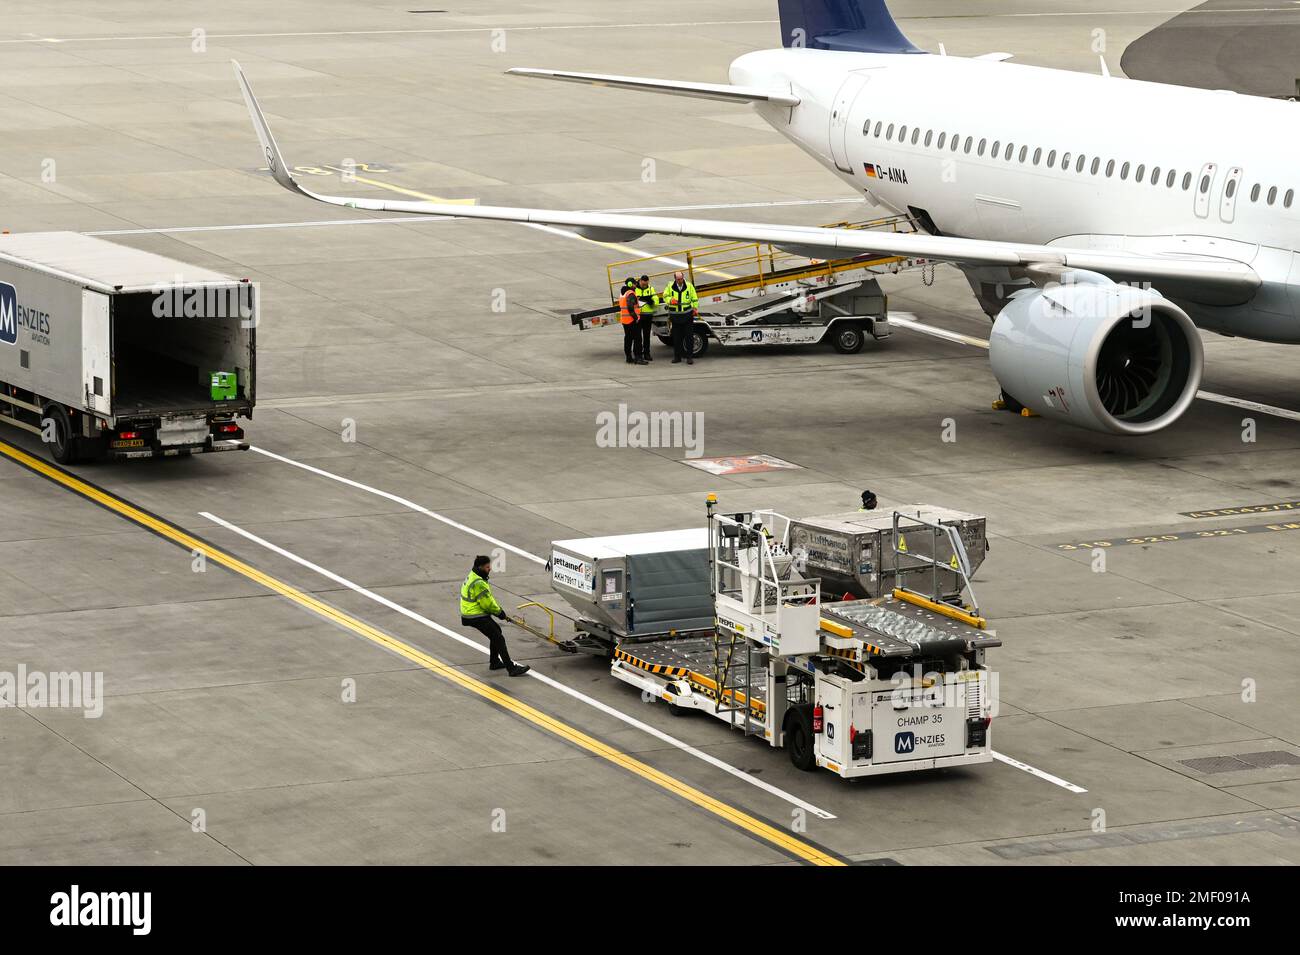 London, England - April 2022: Airport worker pulling a cargo pallet next to a pallet loader vehicle Stock Photo